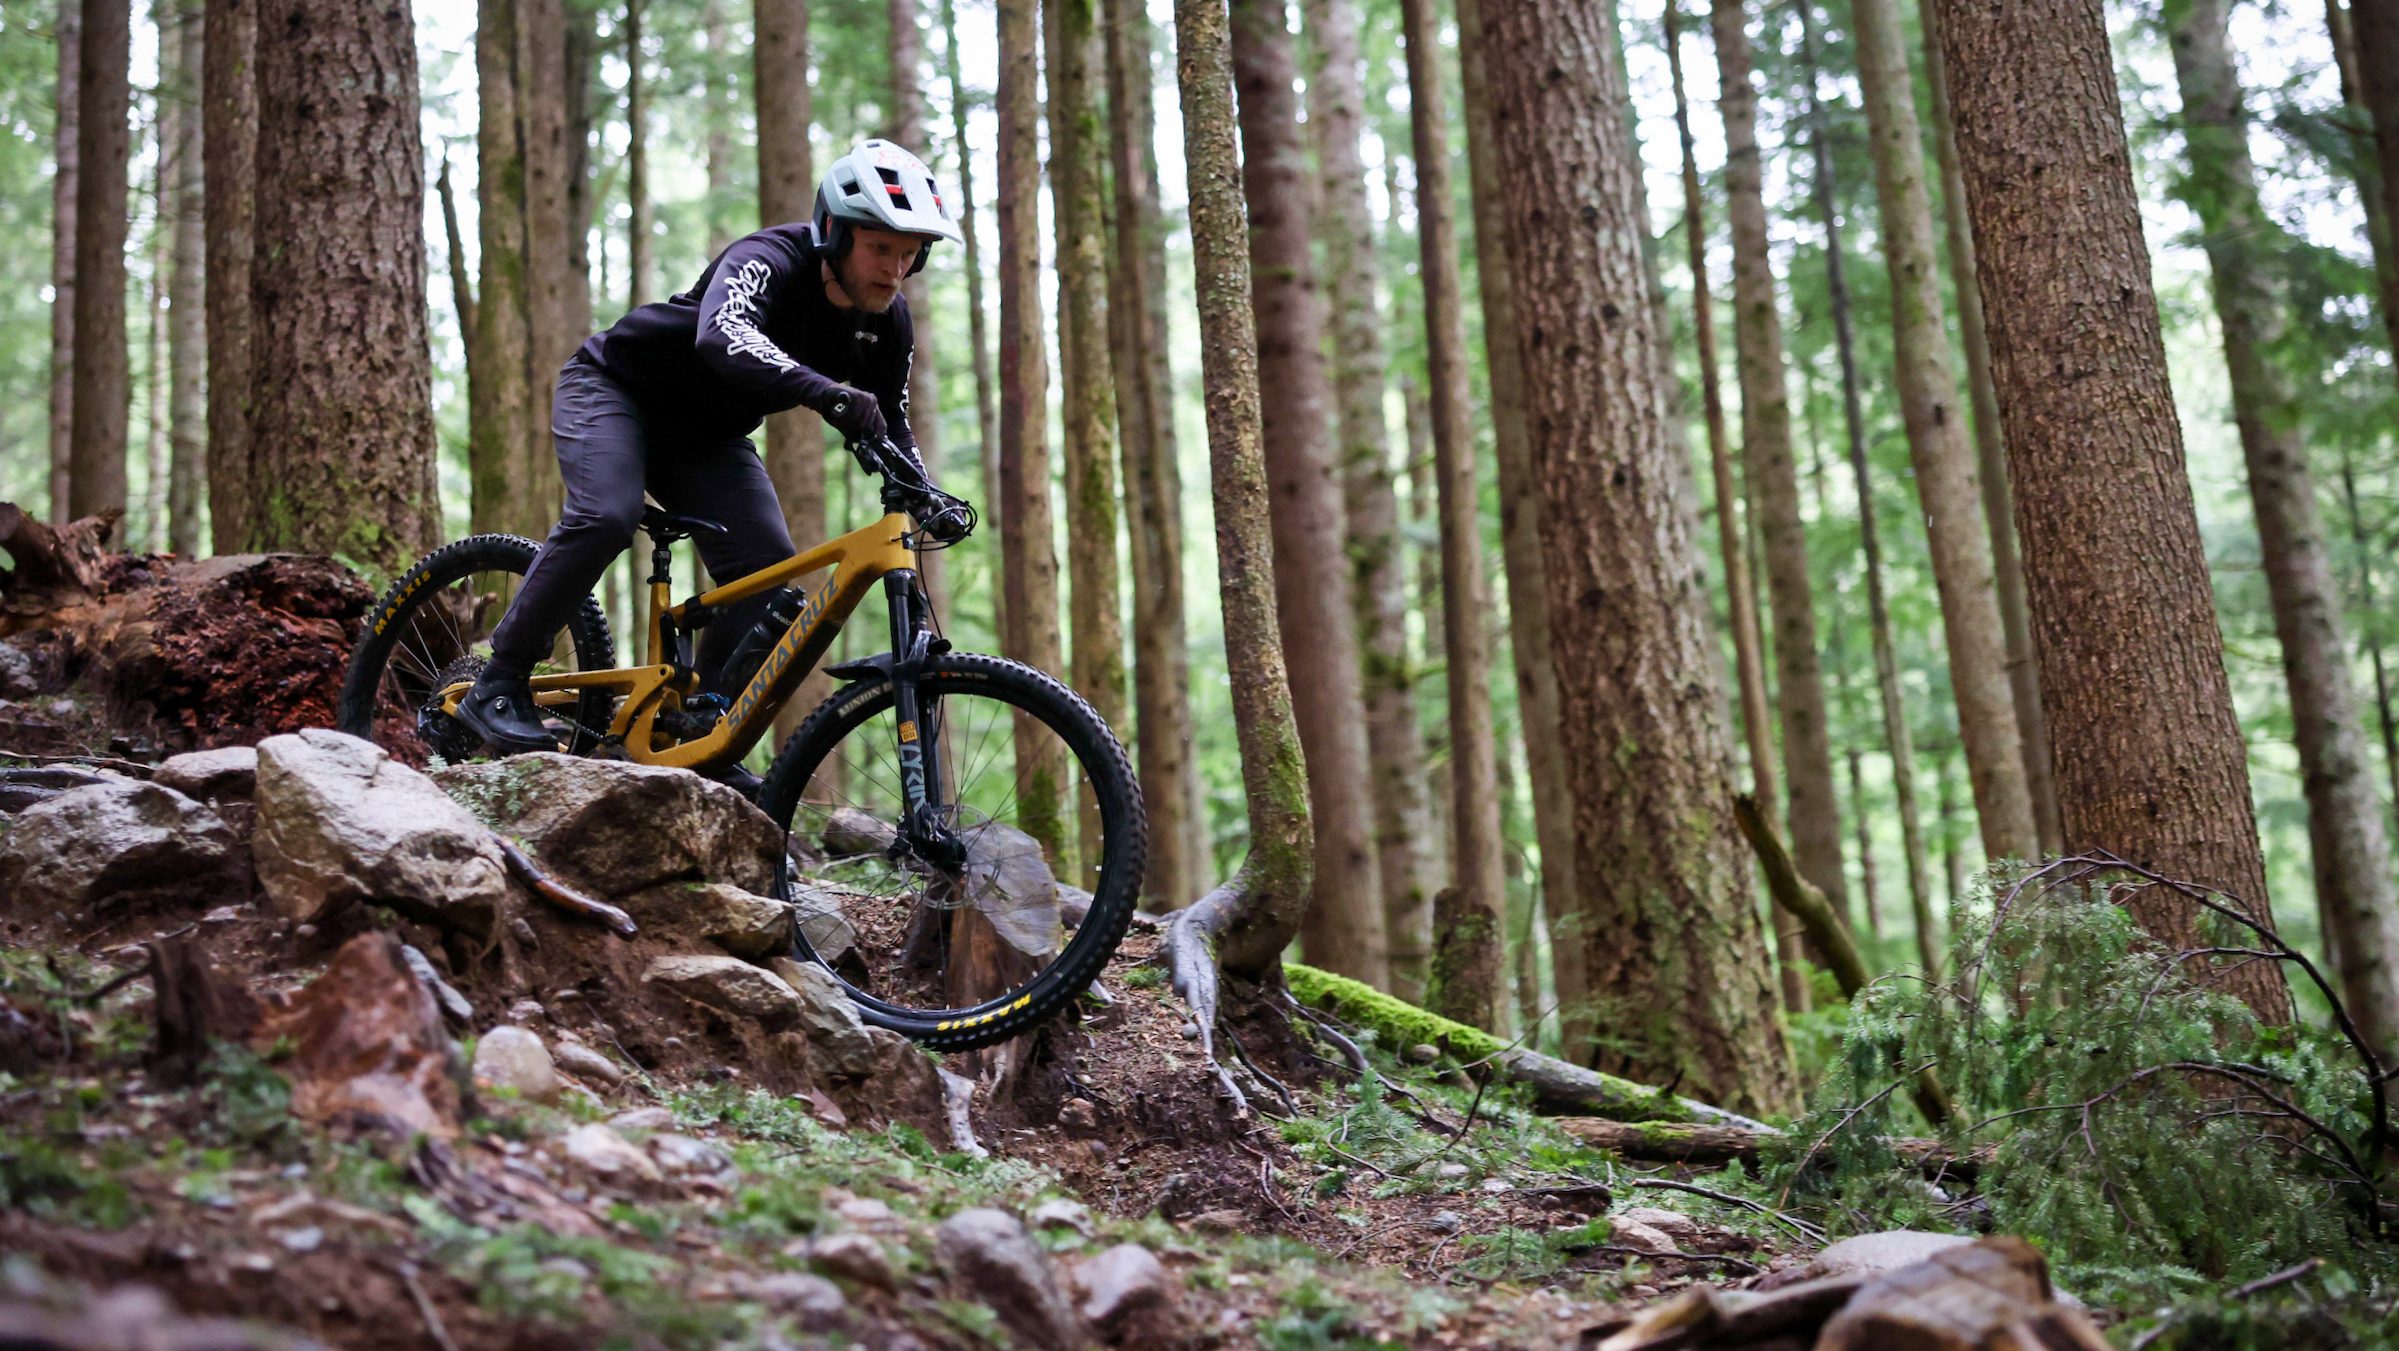 Mountain biker riding a Santa Cruz Bronson down steep, rocky, and root trail in the Pacific Northwest woods.